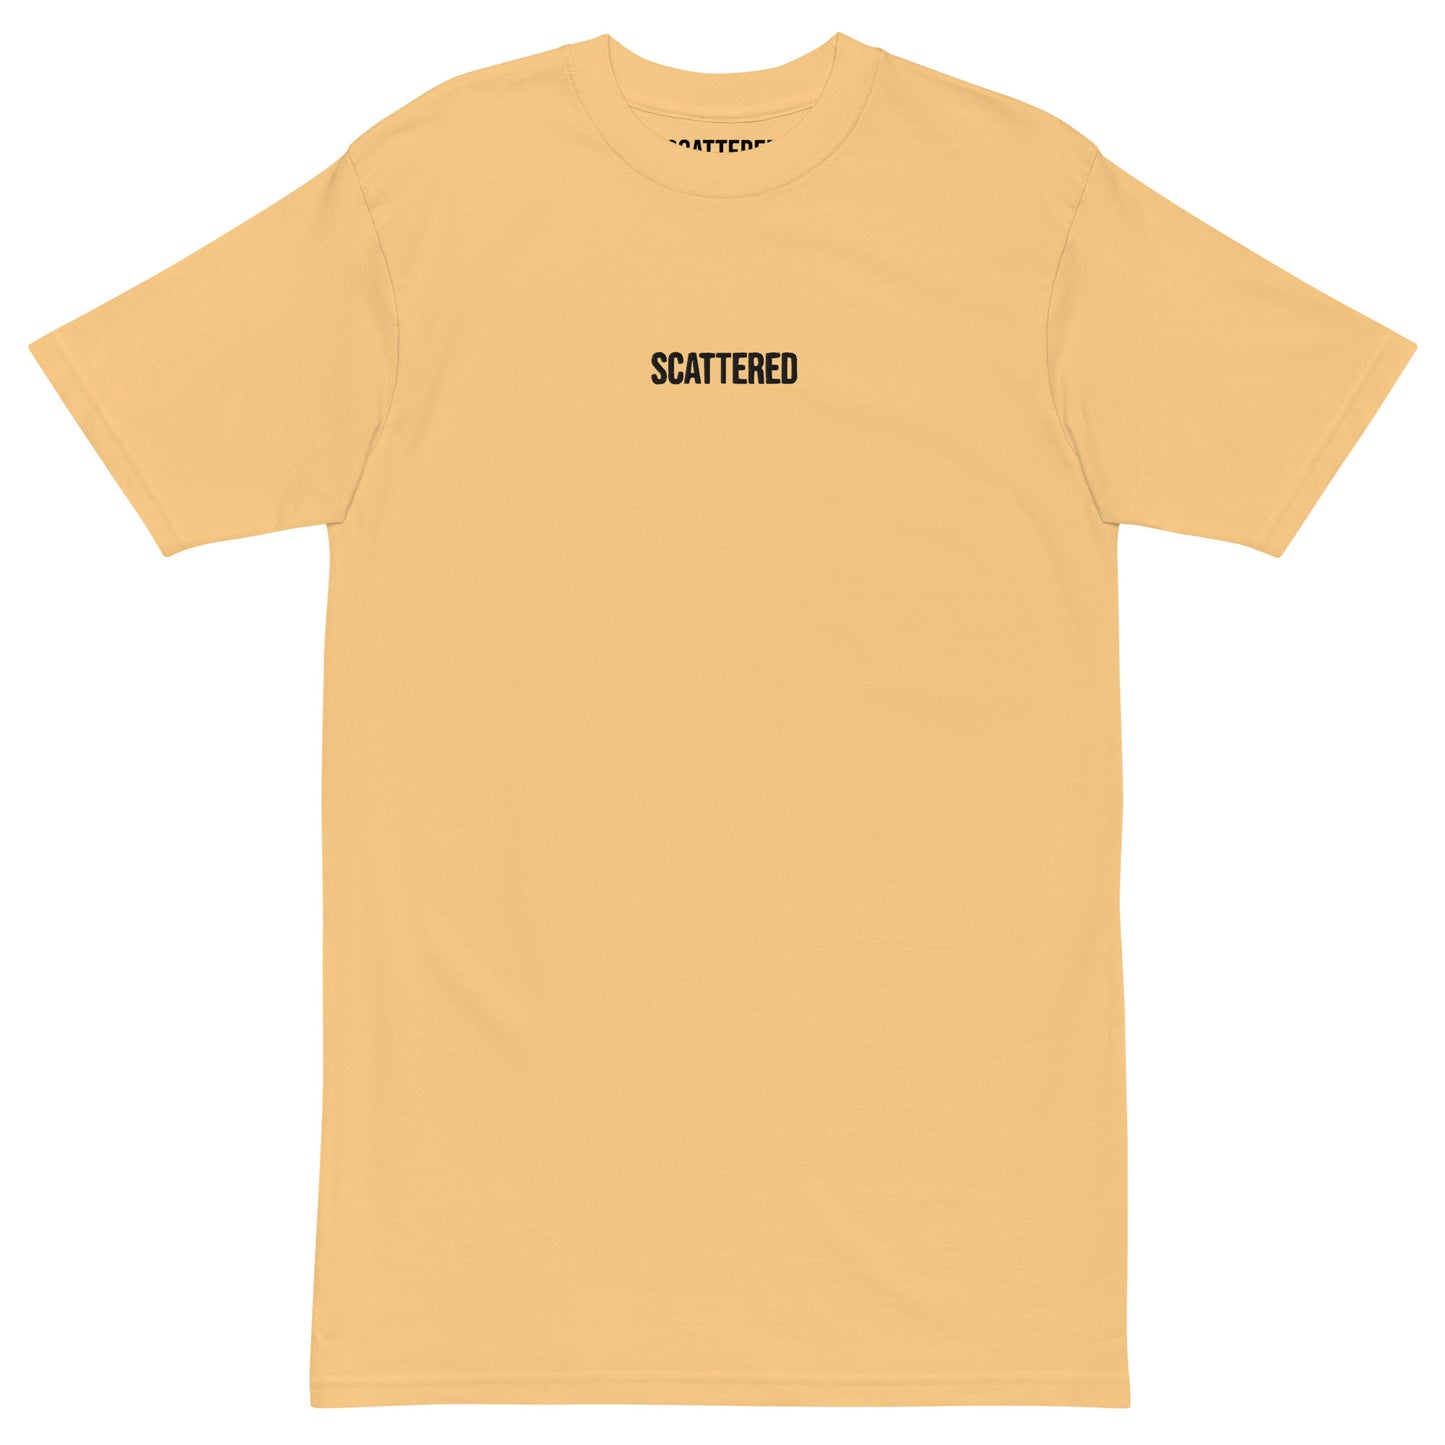 Scattered Logo Embroidered Premium Streetwear T-shirt